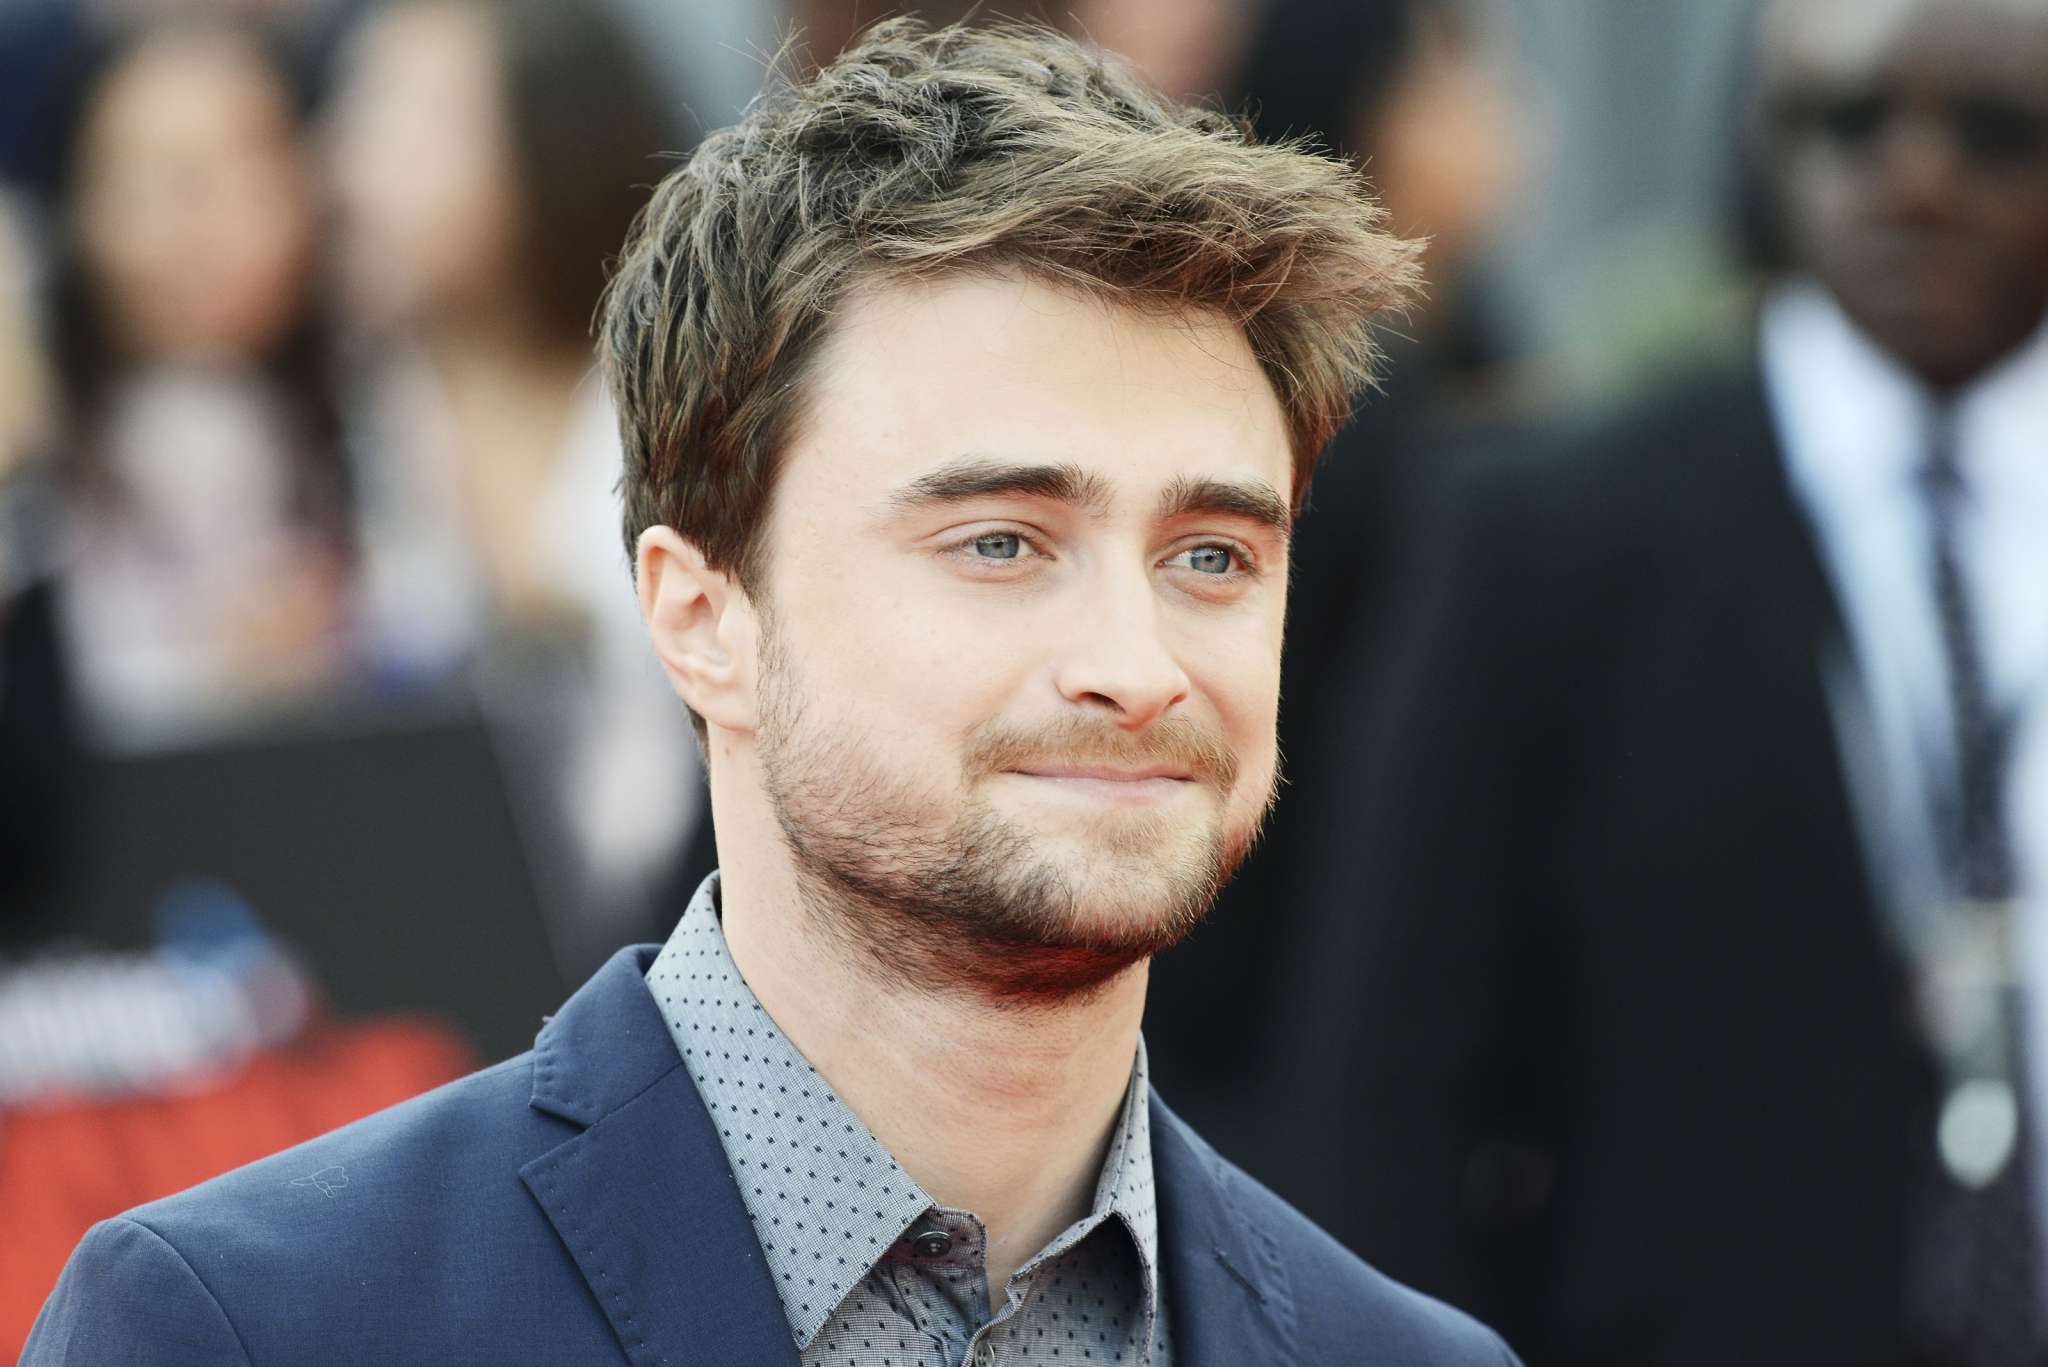 Daniel Radcliffe Talks About JK Rowling And Her Transphobic Comments Once Again

 Cover Story Today